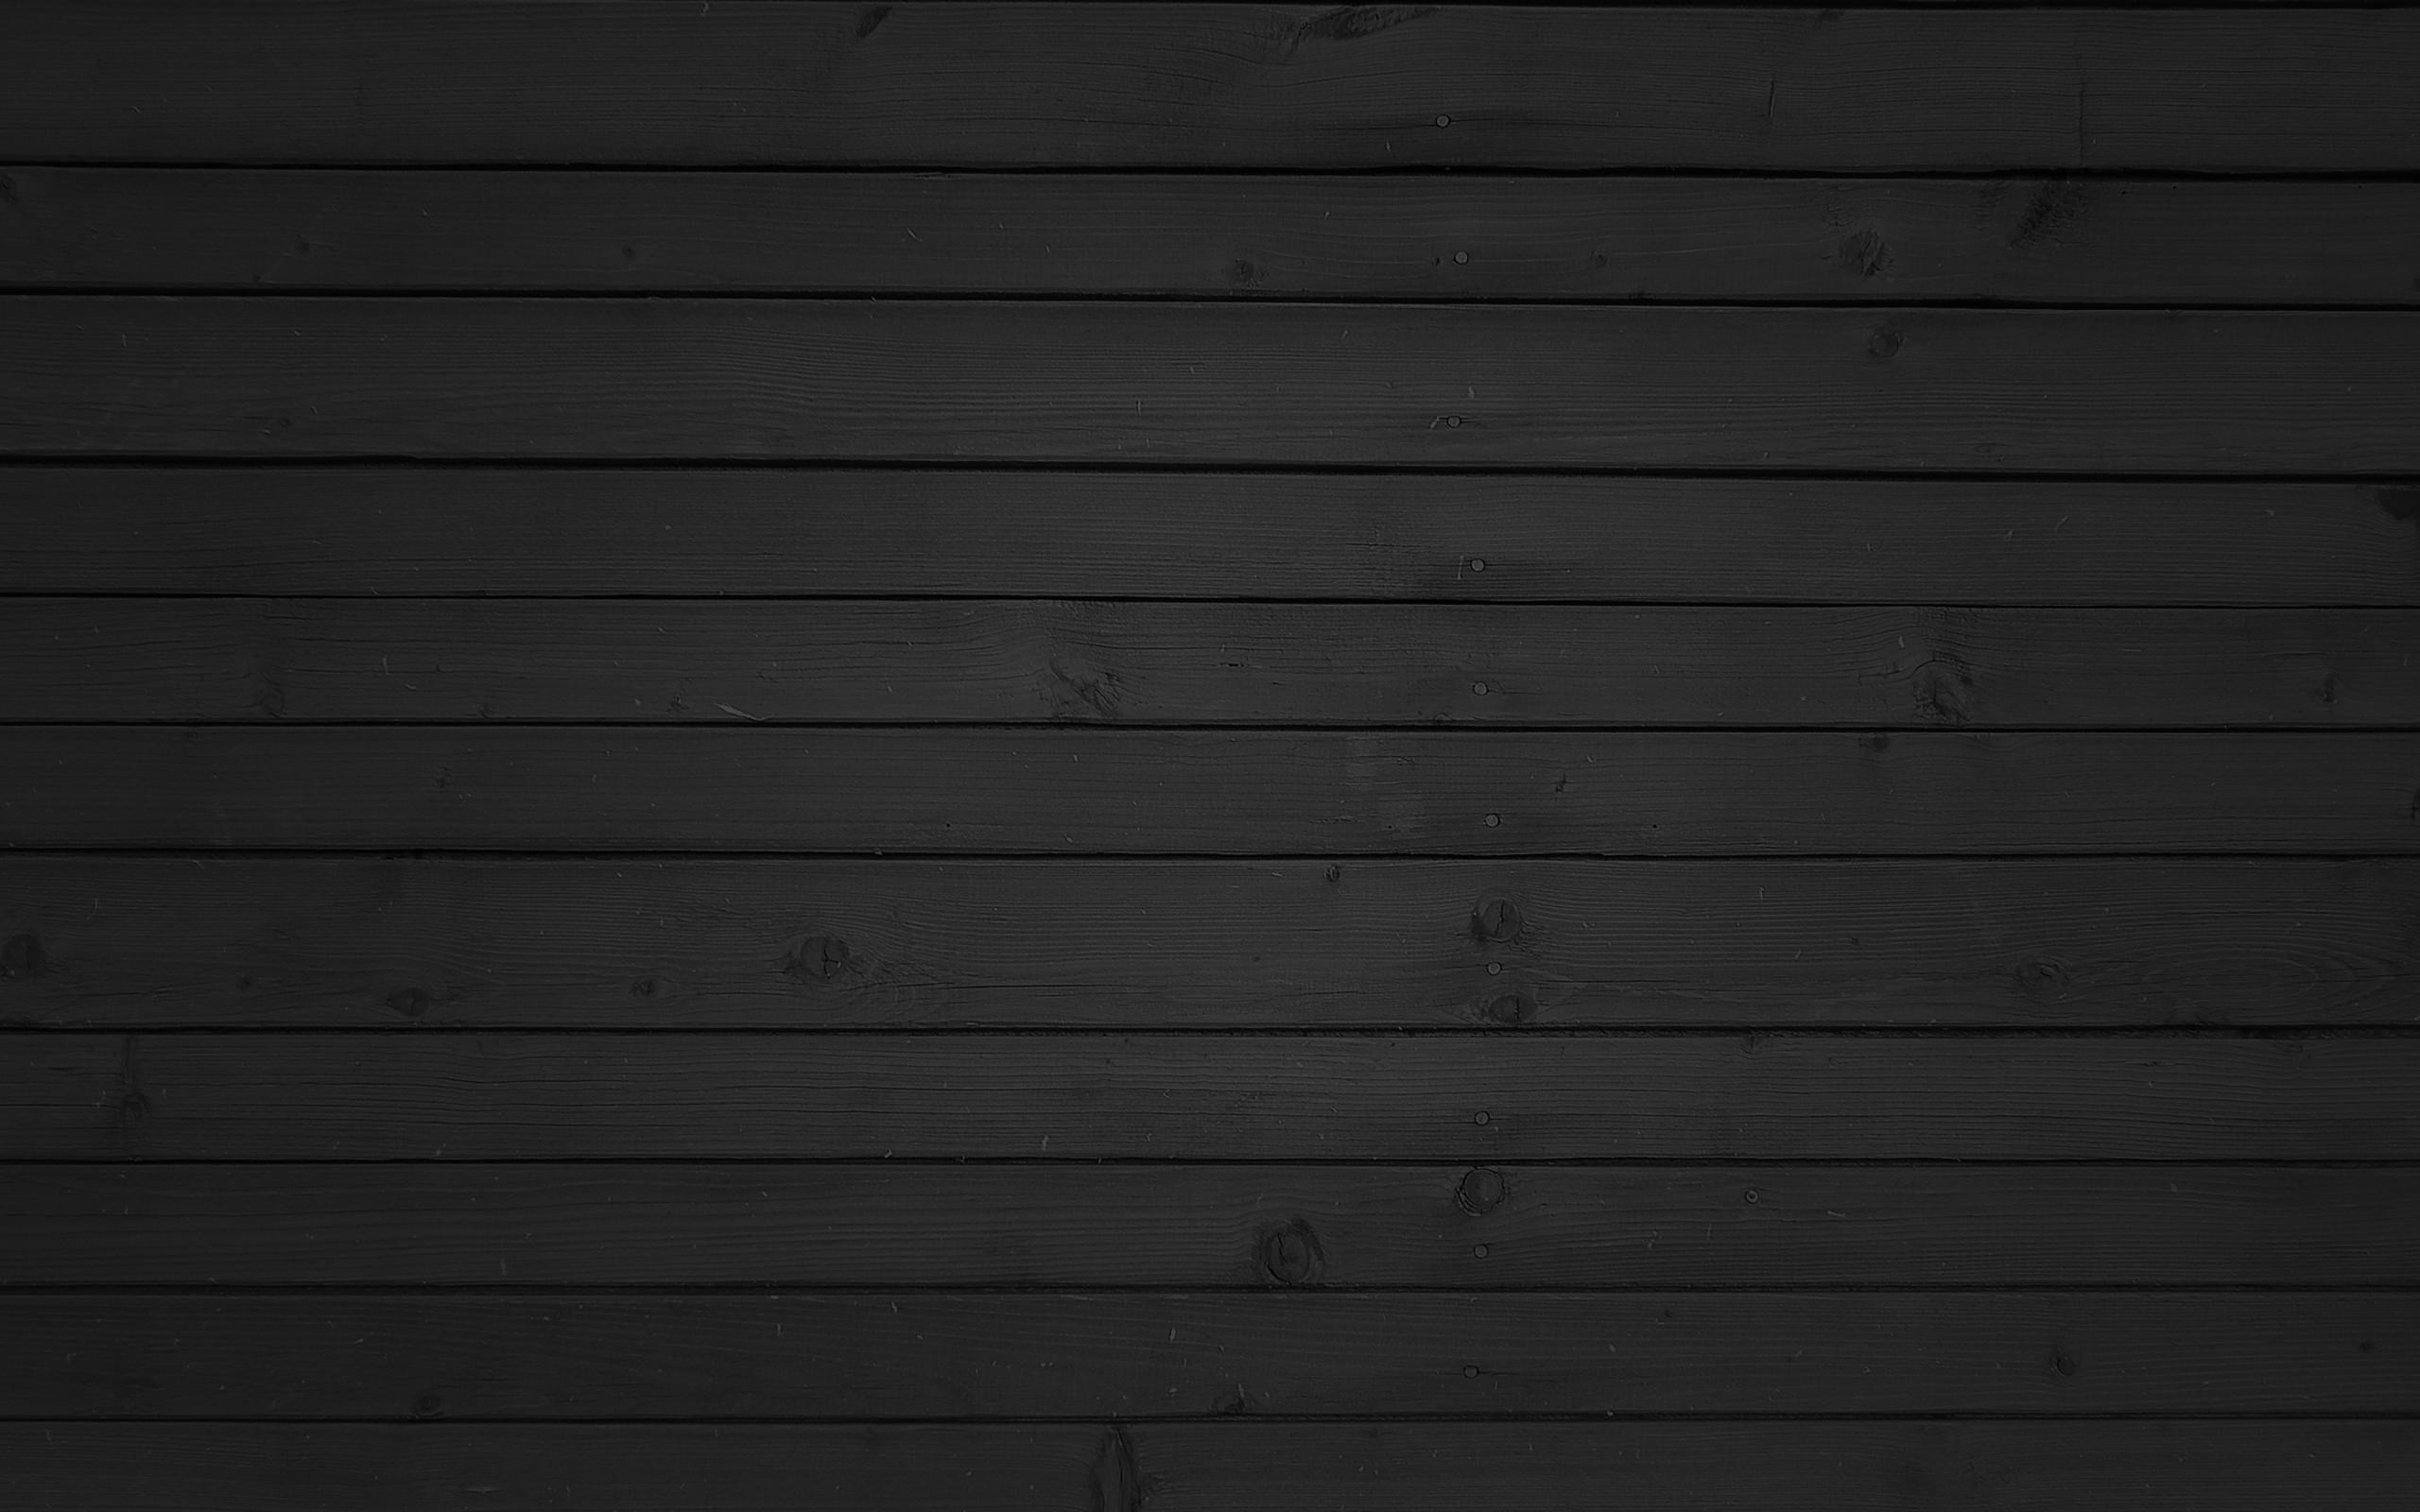 2560x1600 Title : 30+ hd wood backgrounds | wallpapers | freecreatives. Dimension :  2560 x 1600. File Type : JPG/JPEG